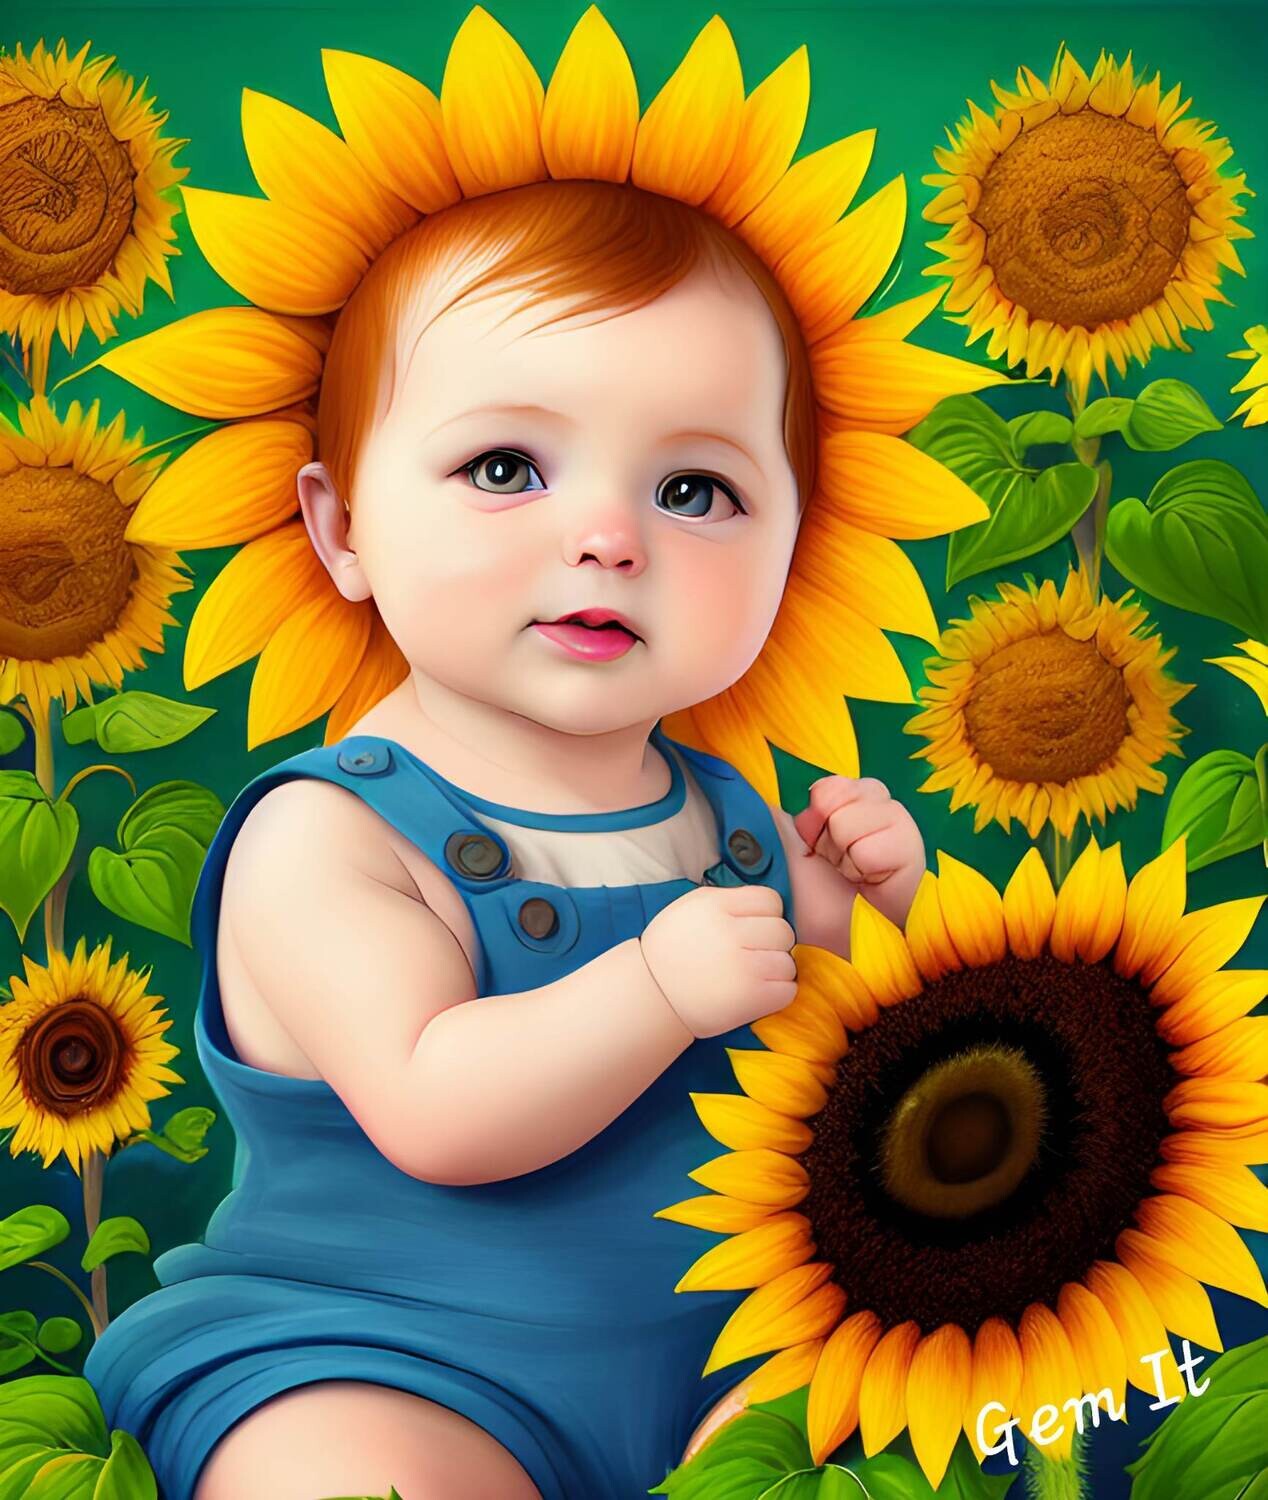 Sunflower Baby 572 - Specially ordered for you. Delivery is approximately 4 - 6 weeks.